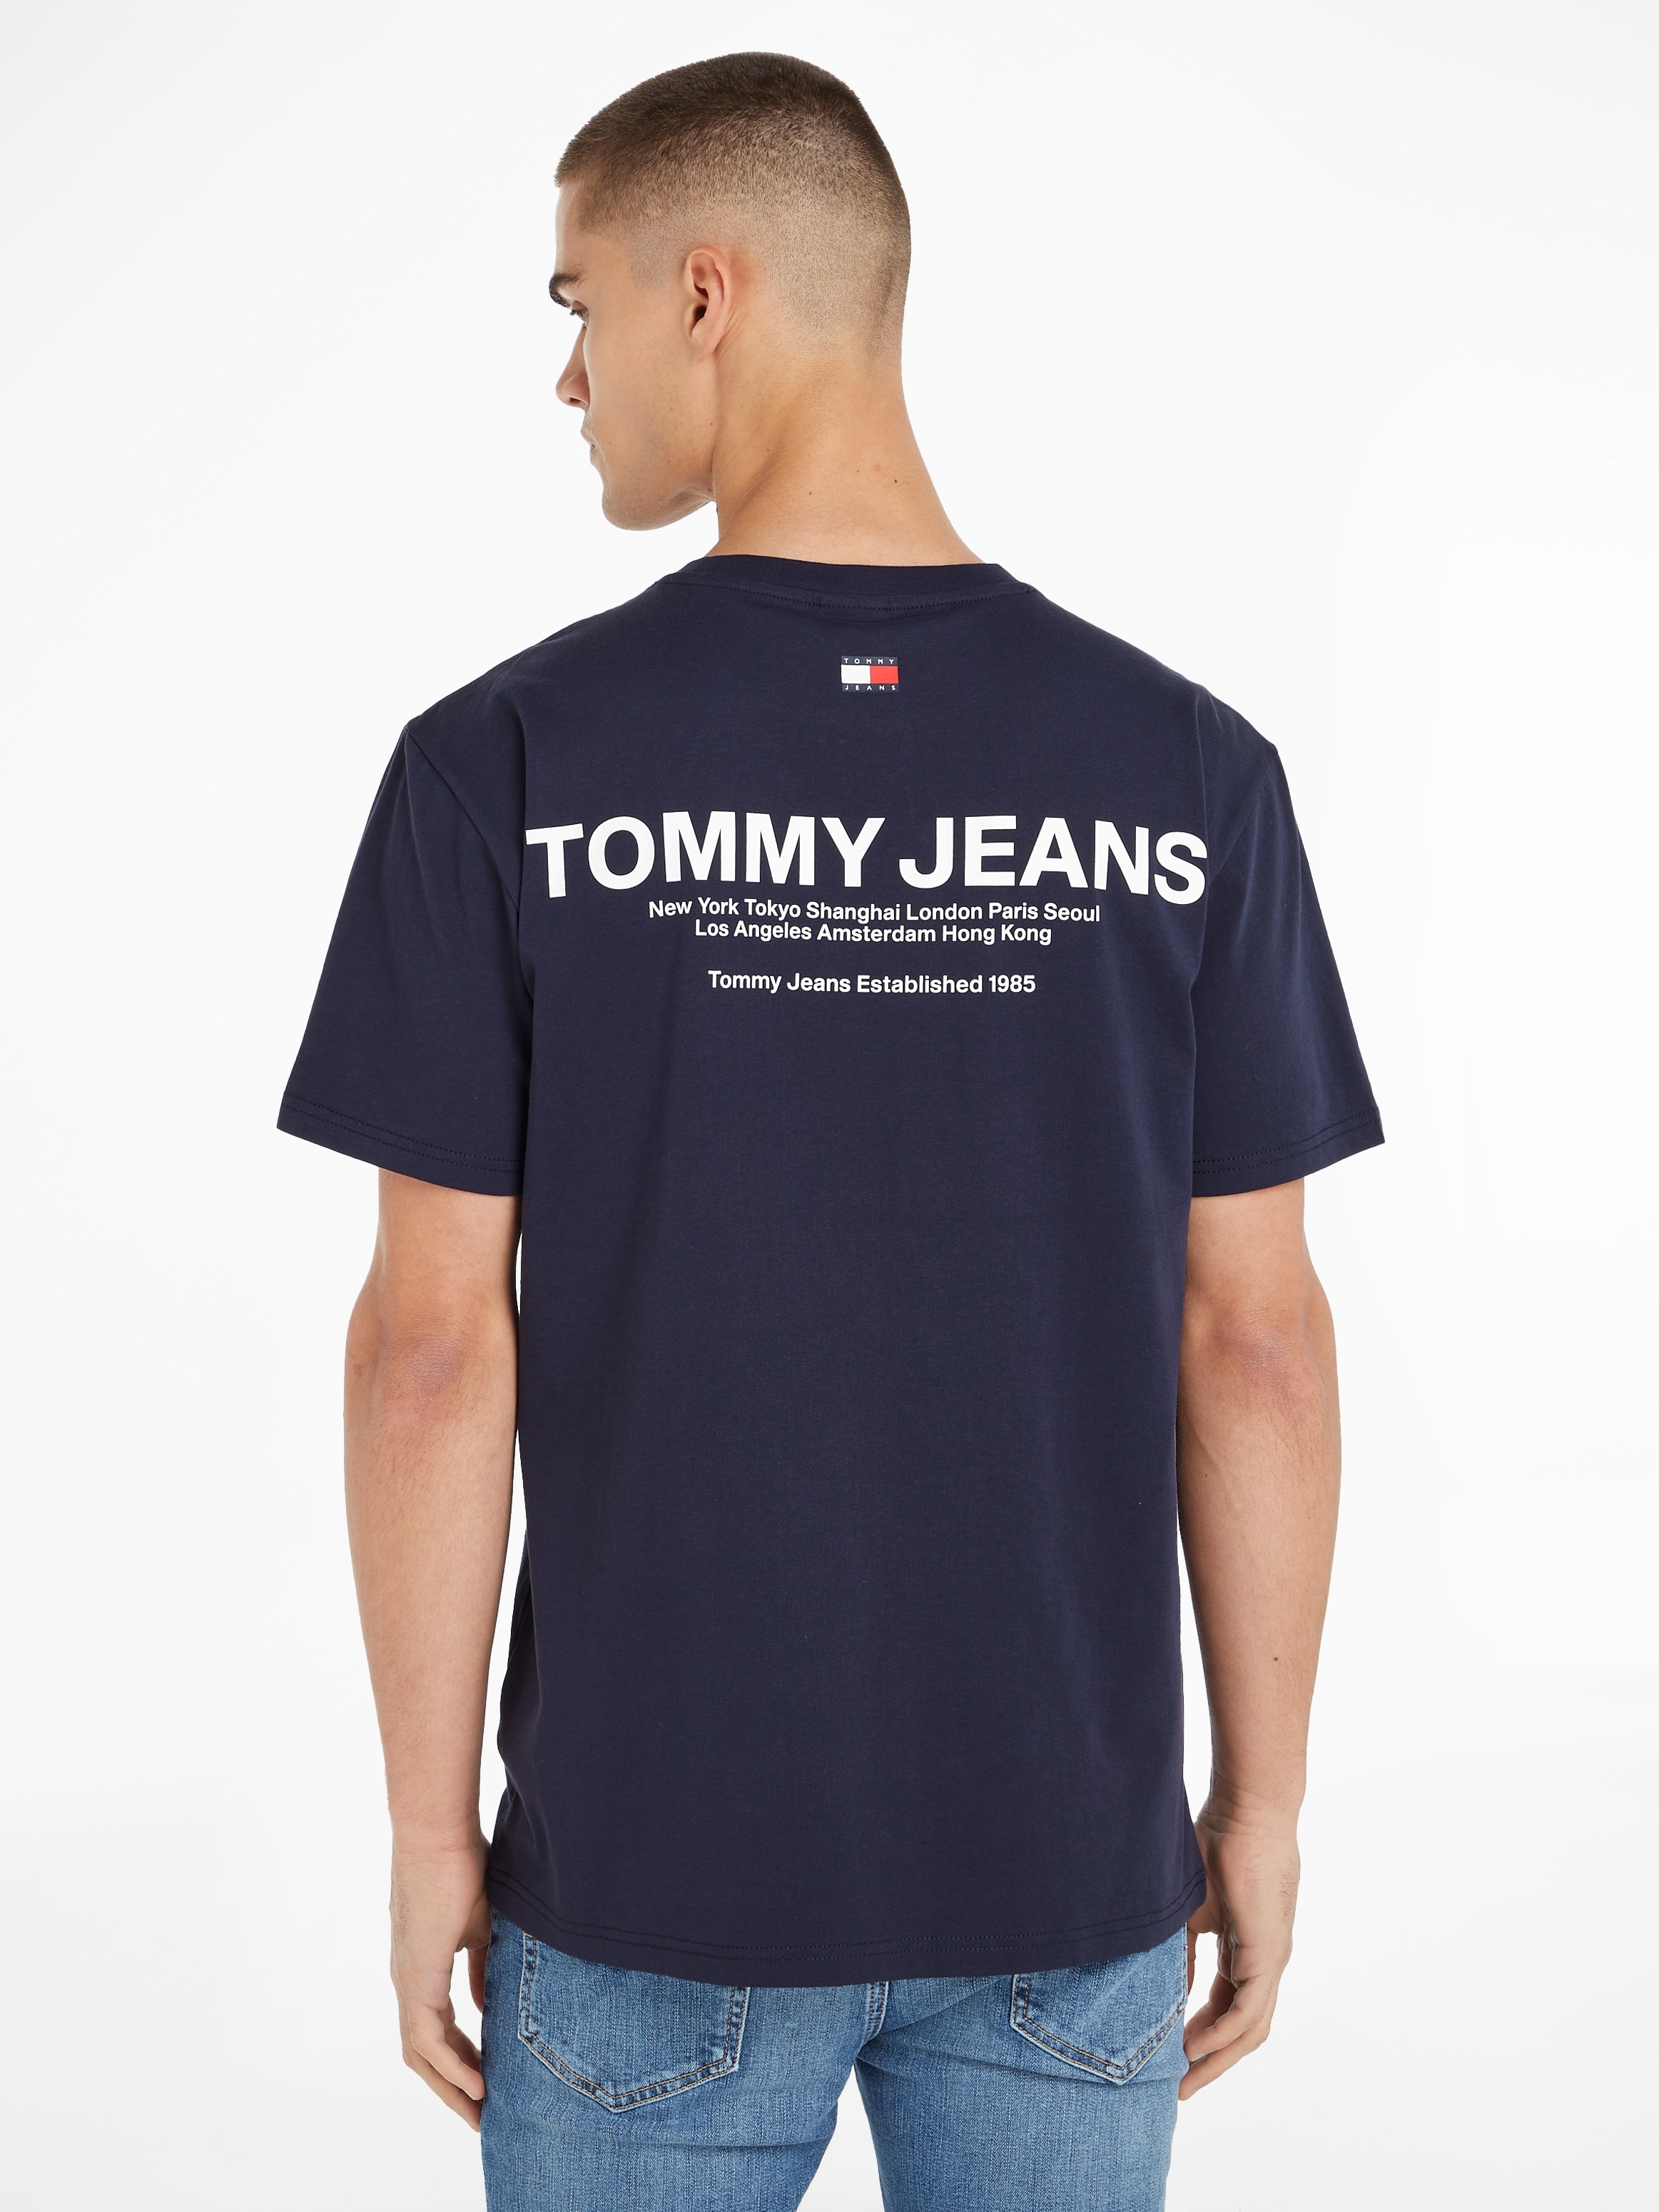 Jeans online OTTO kaufen LINEAR CLSC Tommy BACK »TJM T-Shirt PRINT TEE« bei